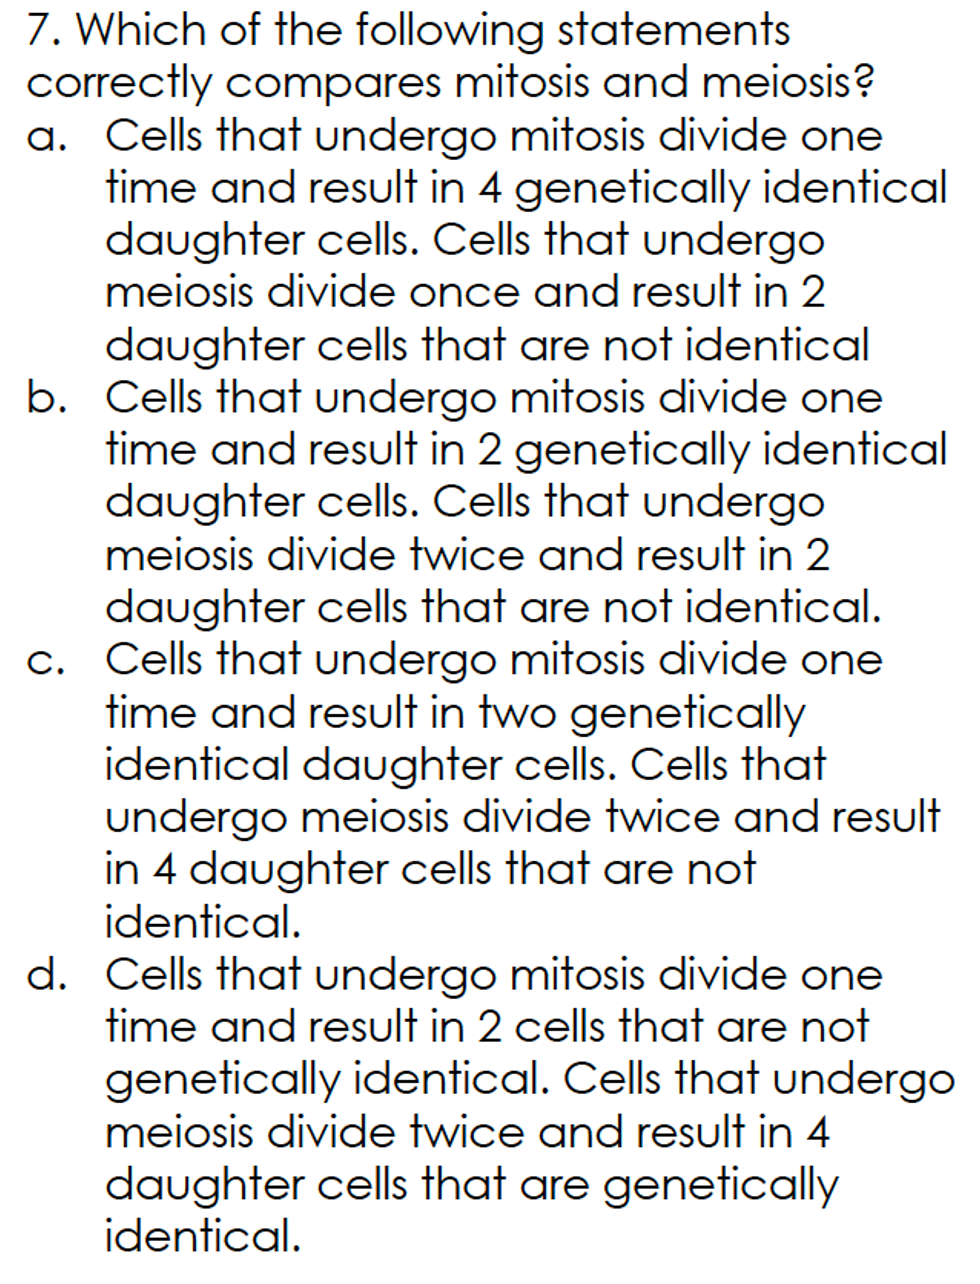 7. Which of the following statements
correctly compares mitosis and meiosis?
a. Cells that undergo mitosis divide one
time and result in 4 genetically identical
daughter cells. Cells that undergo
meiosis divide once and result in 2
daughter cells that are not identical
b. Cells that undergo mitosis divide one
time and result in 2 genetically identical
daughter cells. Cells that undergo
meiosis divide twice and result in 2
daughter cells that are not identical.
c. Cells that undergo mitosis divide one
time and result in two genetically
identical daughter cells. Cells that
undergo meiosis divide twice and result
in 4 daughter cells that are not
identical.
d. Cells that undergo mitosis divide one
time and result in 2 cells that are not
genetically identical. Cells that undergo
meiosis divide twice and result in 4
daughter cells that are genetically
identical.
